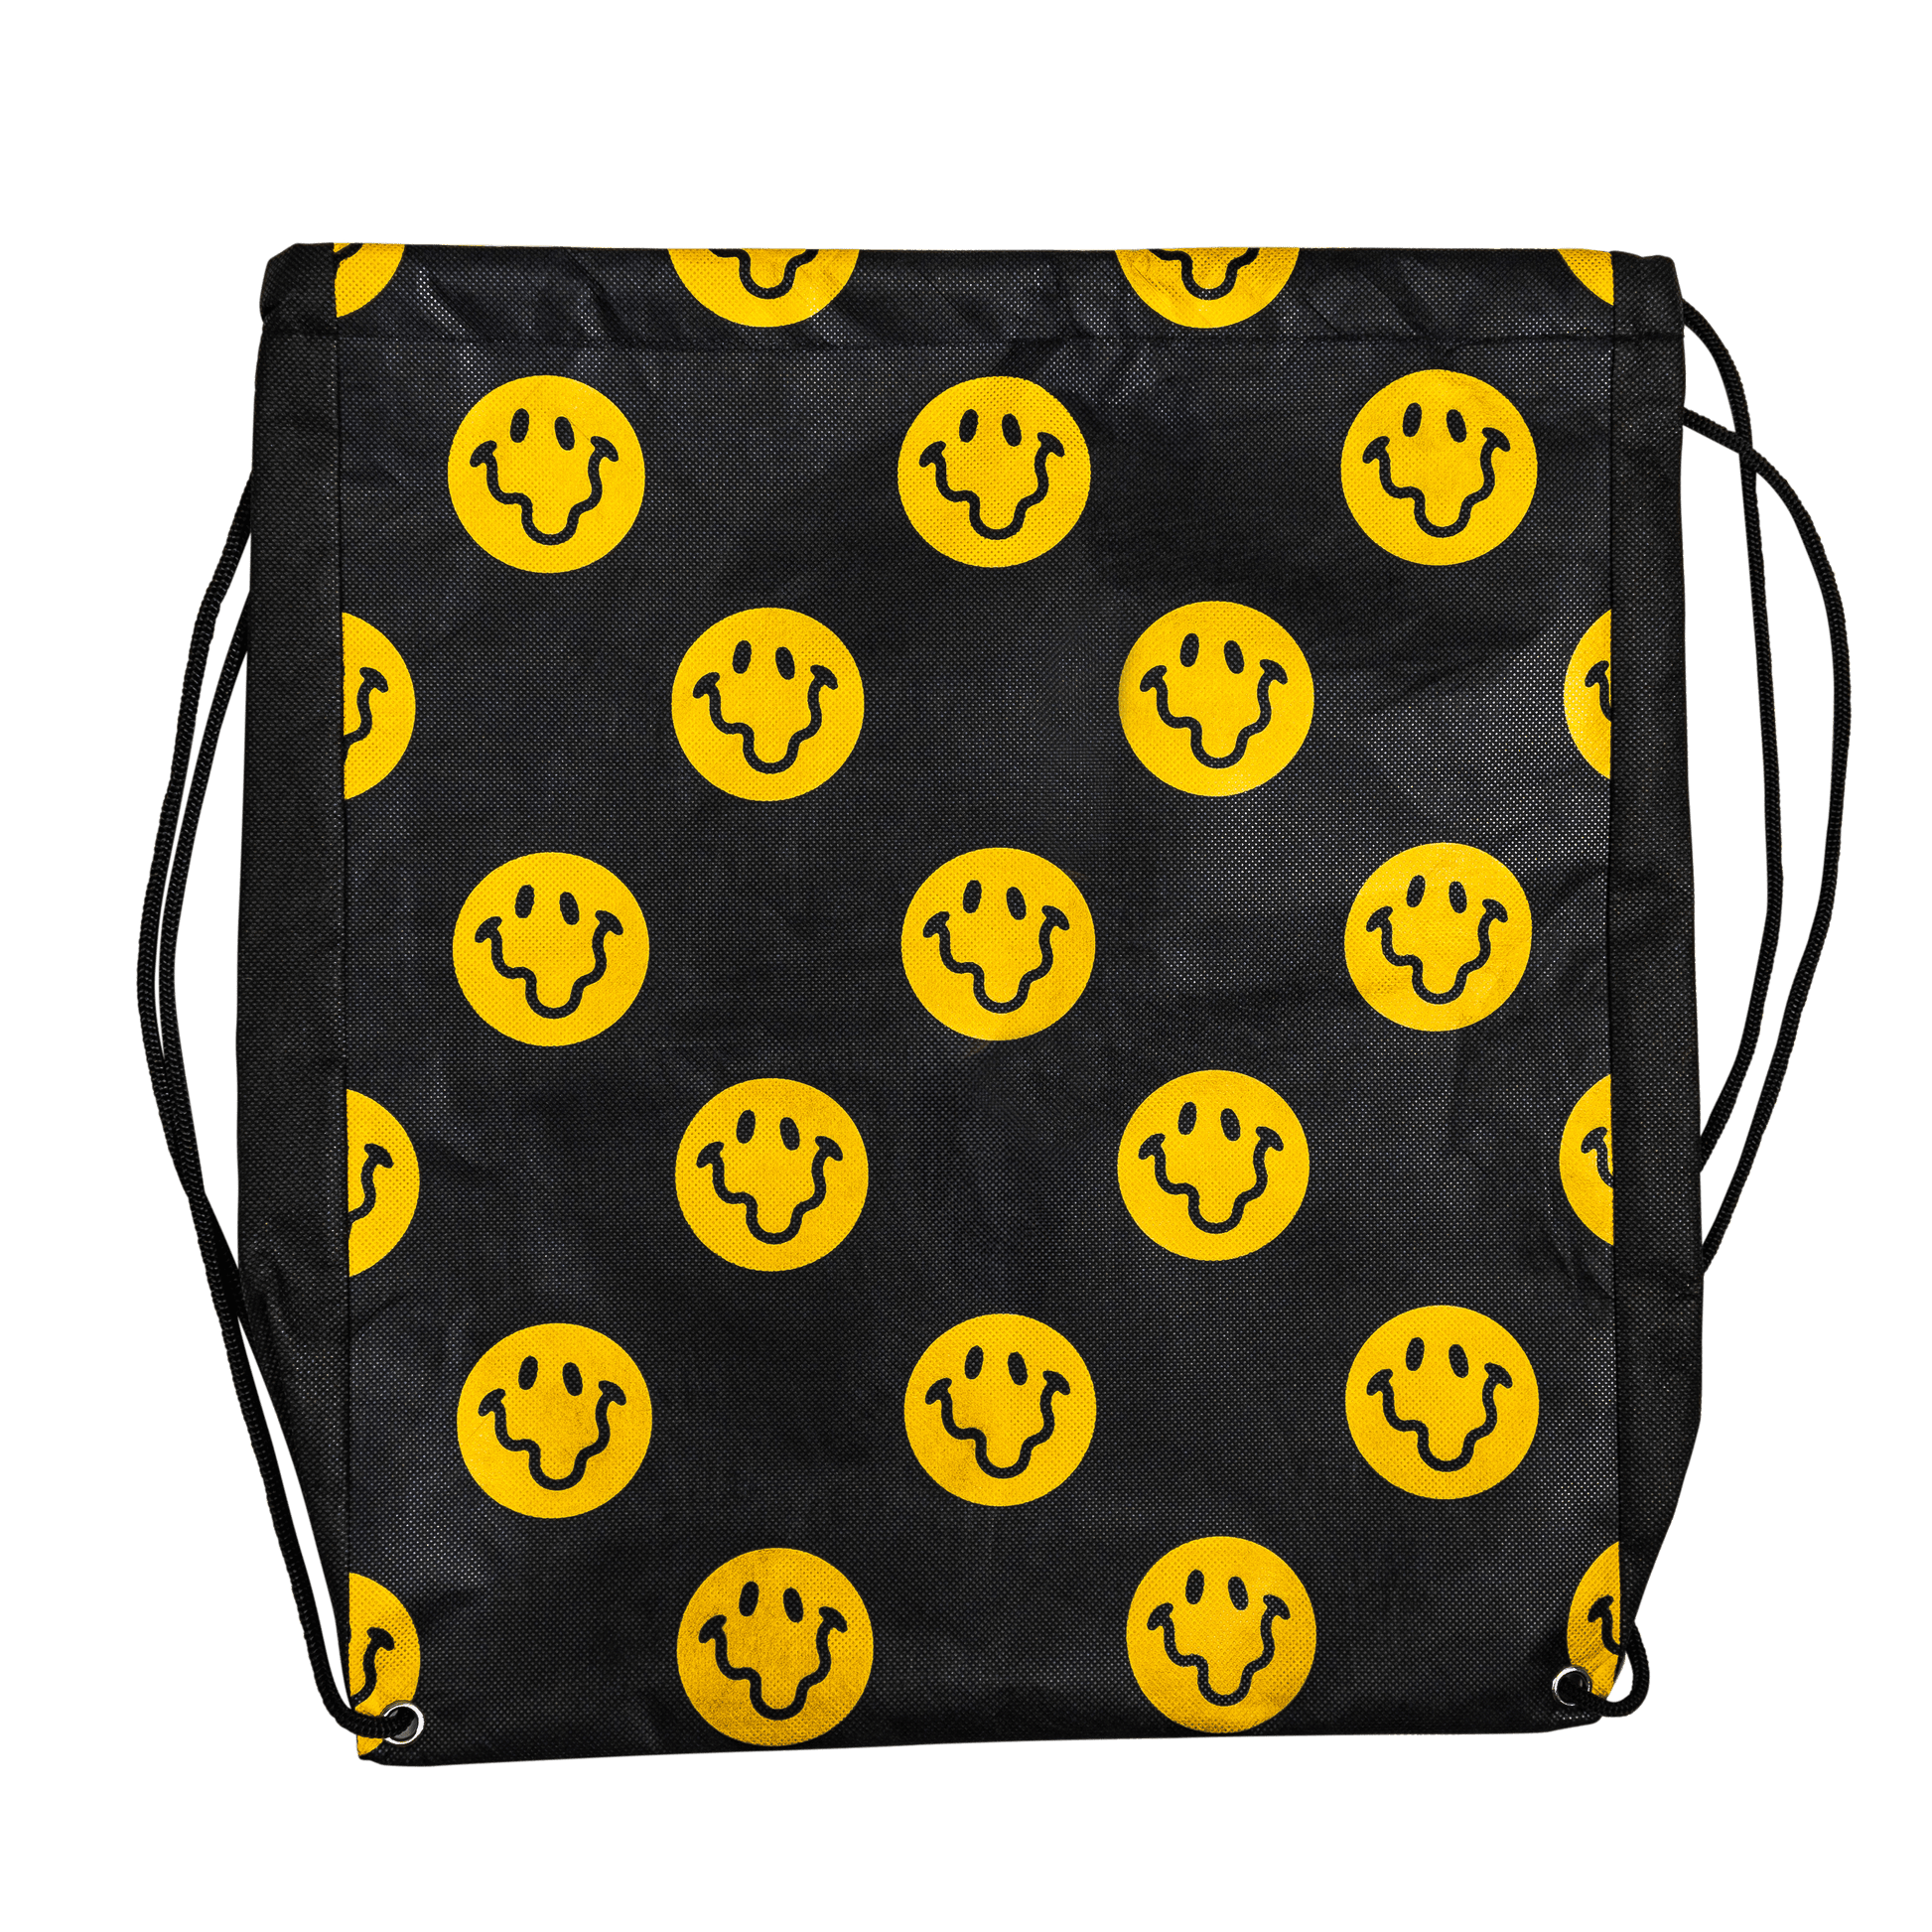 Tipsy Squared Eco Bag Eco Bag Frothies